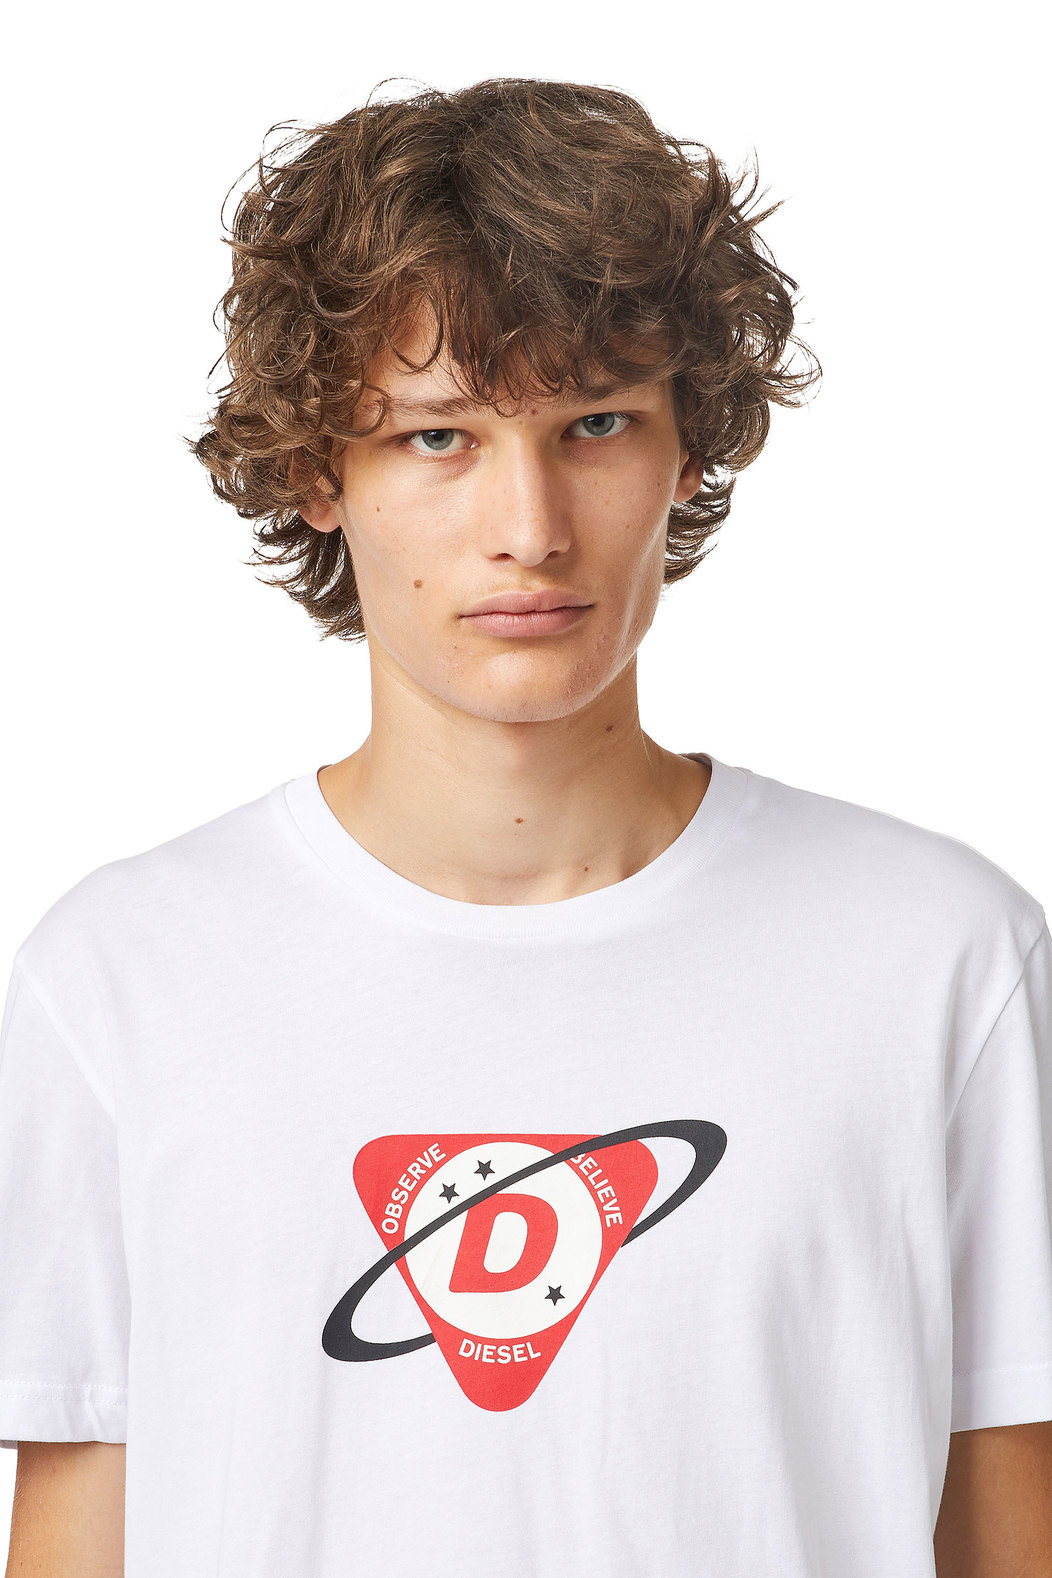 Green Label T-Shirt With Space Logo